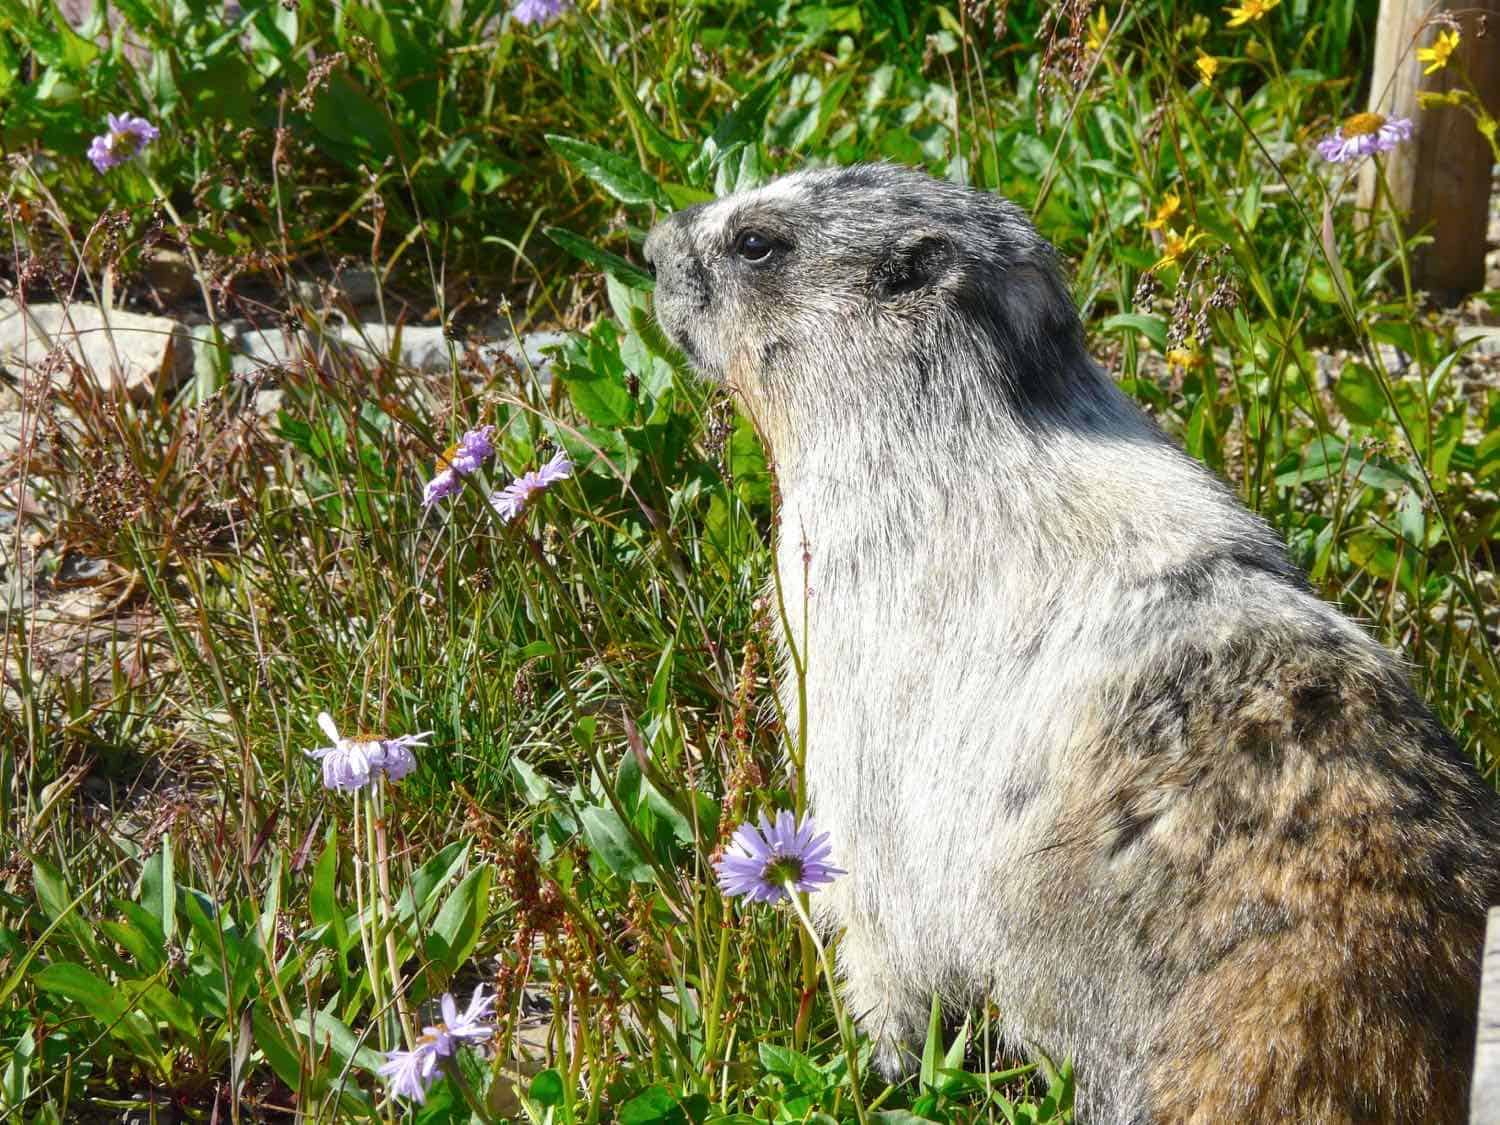 gray marmot in widlflowers and grass